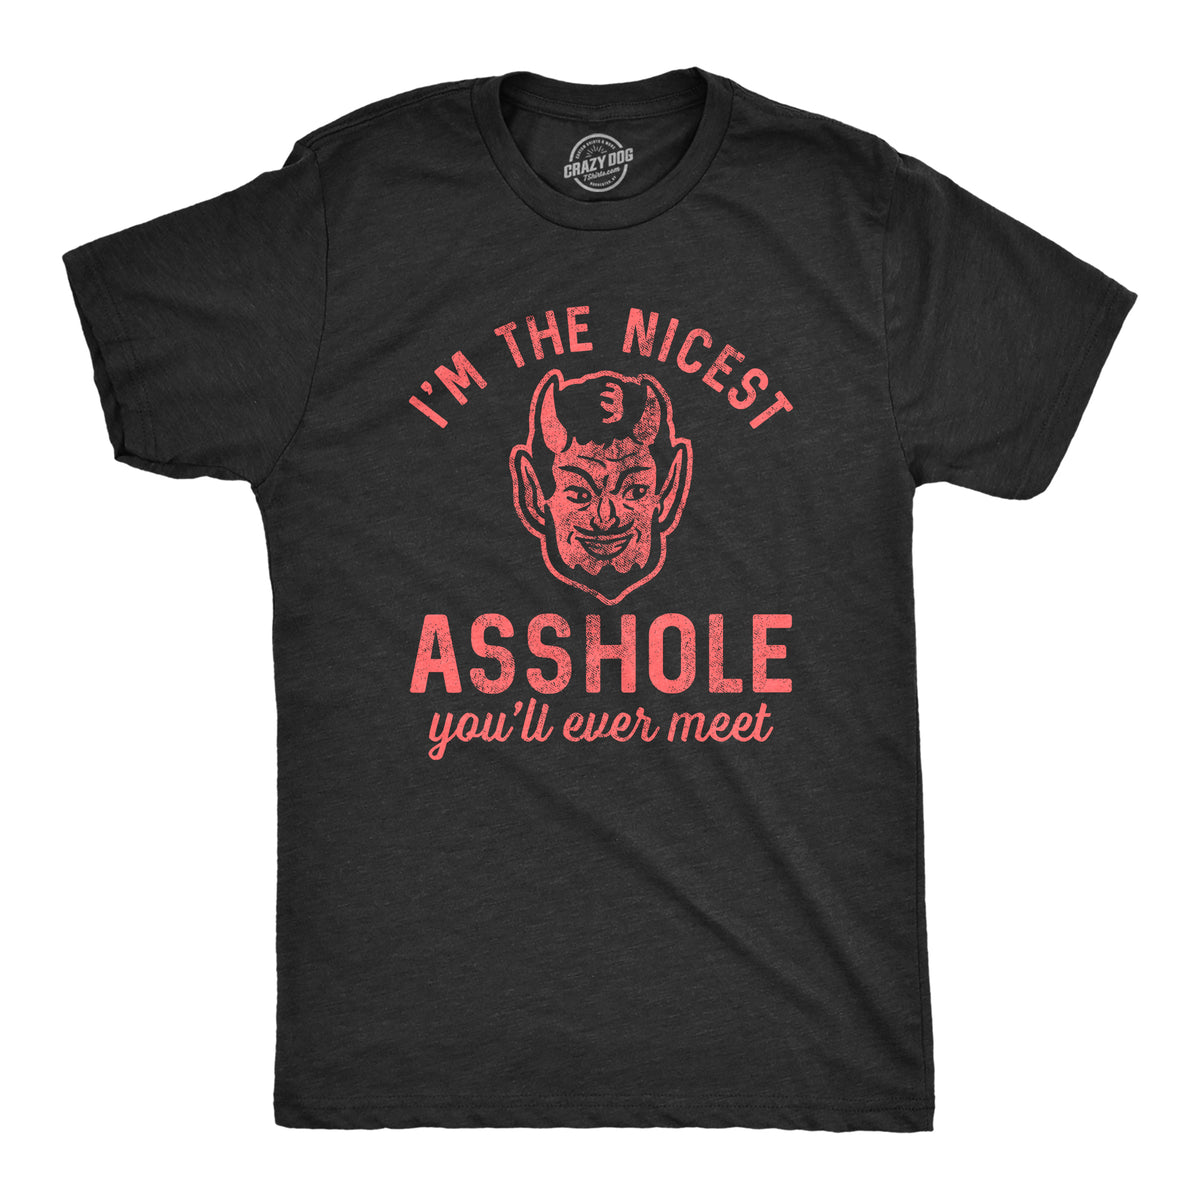 Funny Heather Black - Nicest Ahole I&#39;m The Nicest Asshole You&#39;ll Ever Meet Mens T Shirt Nerdy Sarcastic Tee